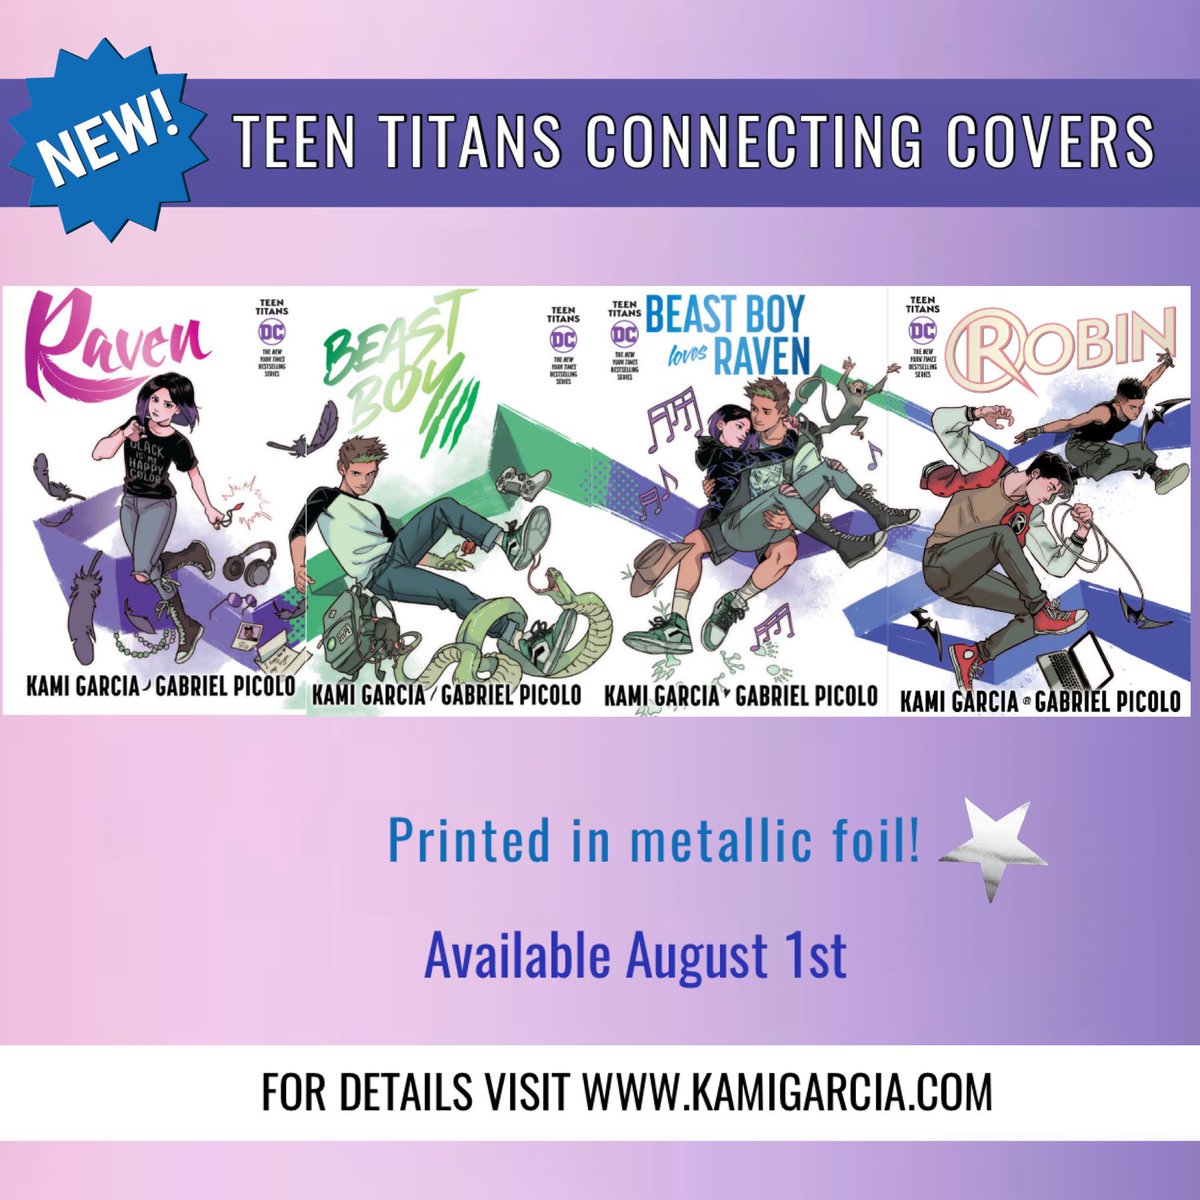 Today is the day! The Teen Titans connecting covers with gorgeous new art by @_picolo & metallic foil are out in the world! Check your local bookstore or comic shop.